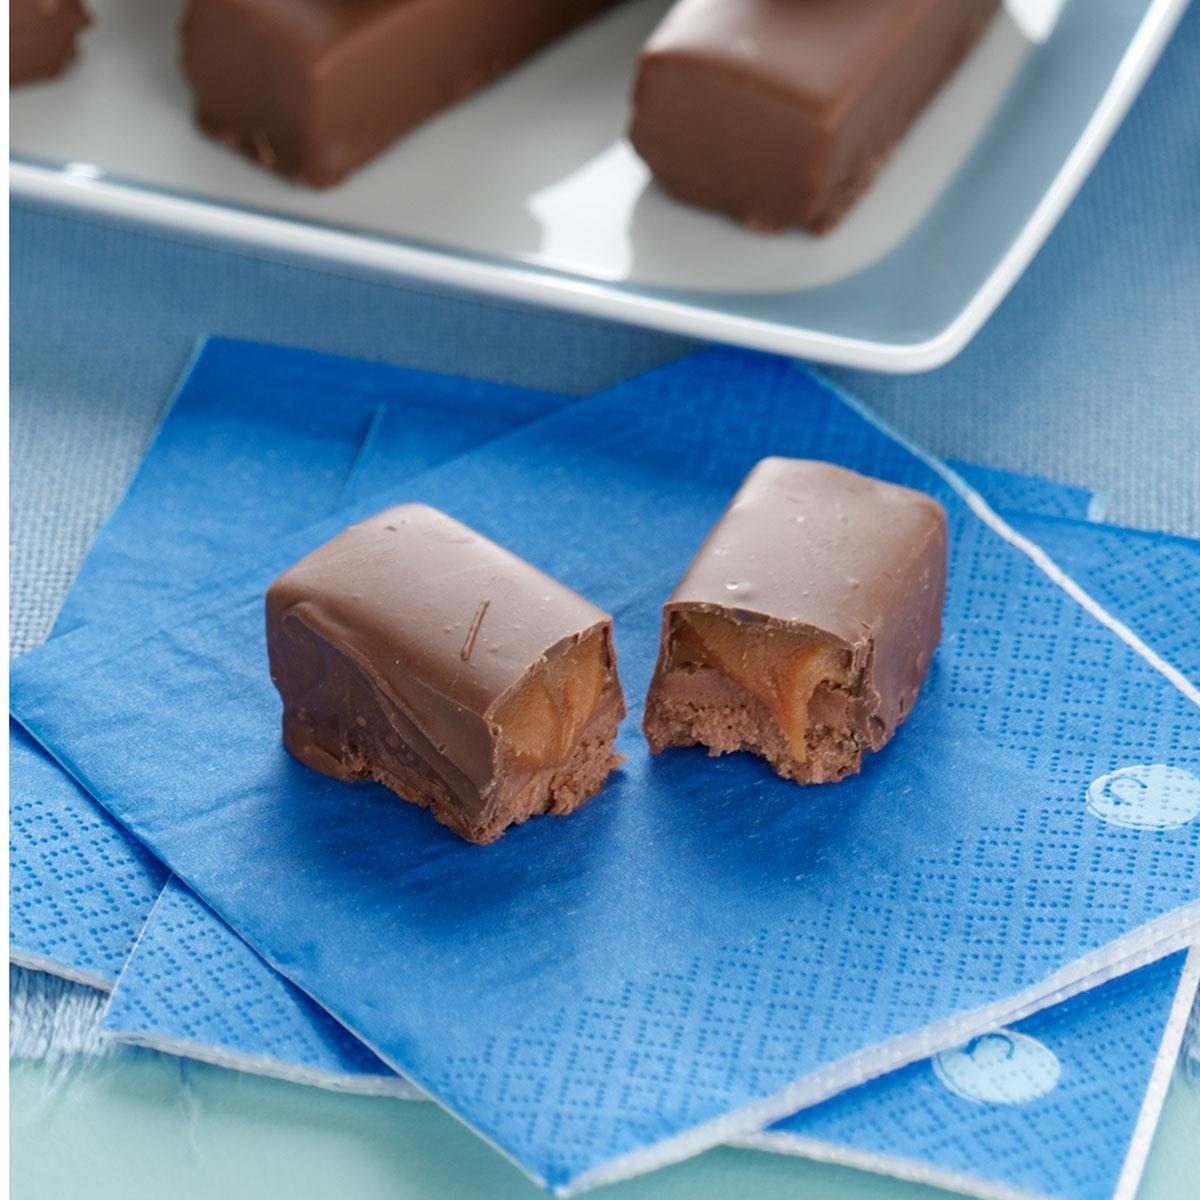 https://www.tasteofhome.com/wp-content/uploads/2018/01/Chocolate-Caramel-Candy-Bars_exps49308_THCA1917912B03_02_5bC_RMS.jpg